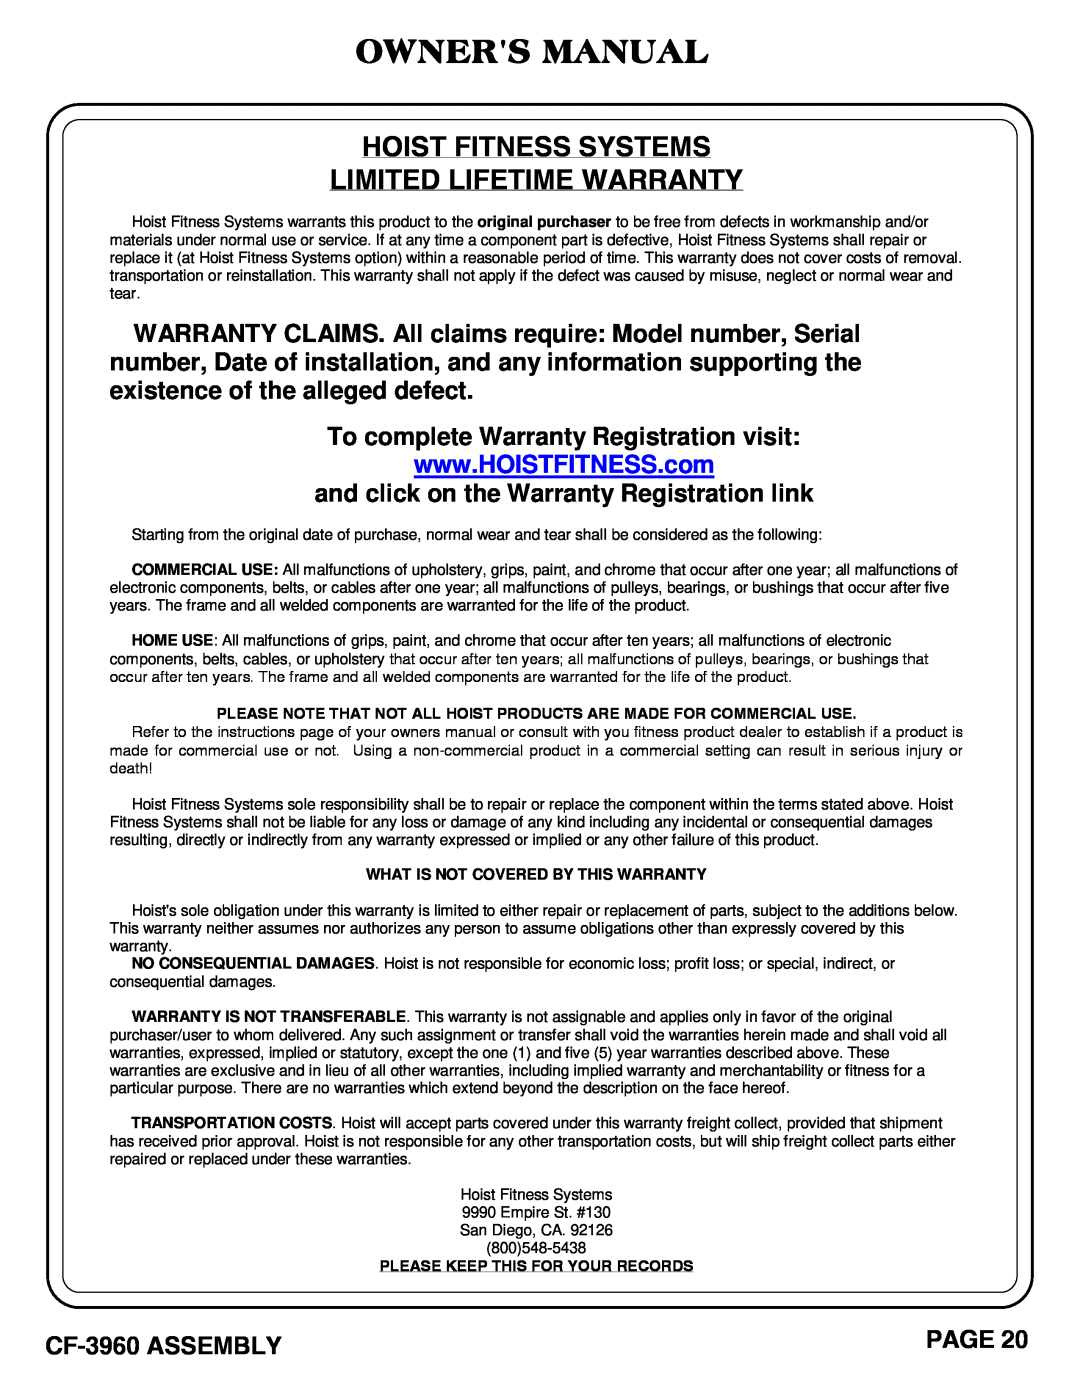 Hoist Fitness CF-3960 Hoist Fitness Systems Limited Lifetime Warranty, Page, What Is Not Covered By This Warranty 